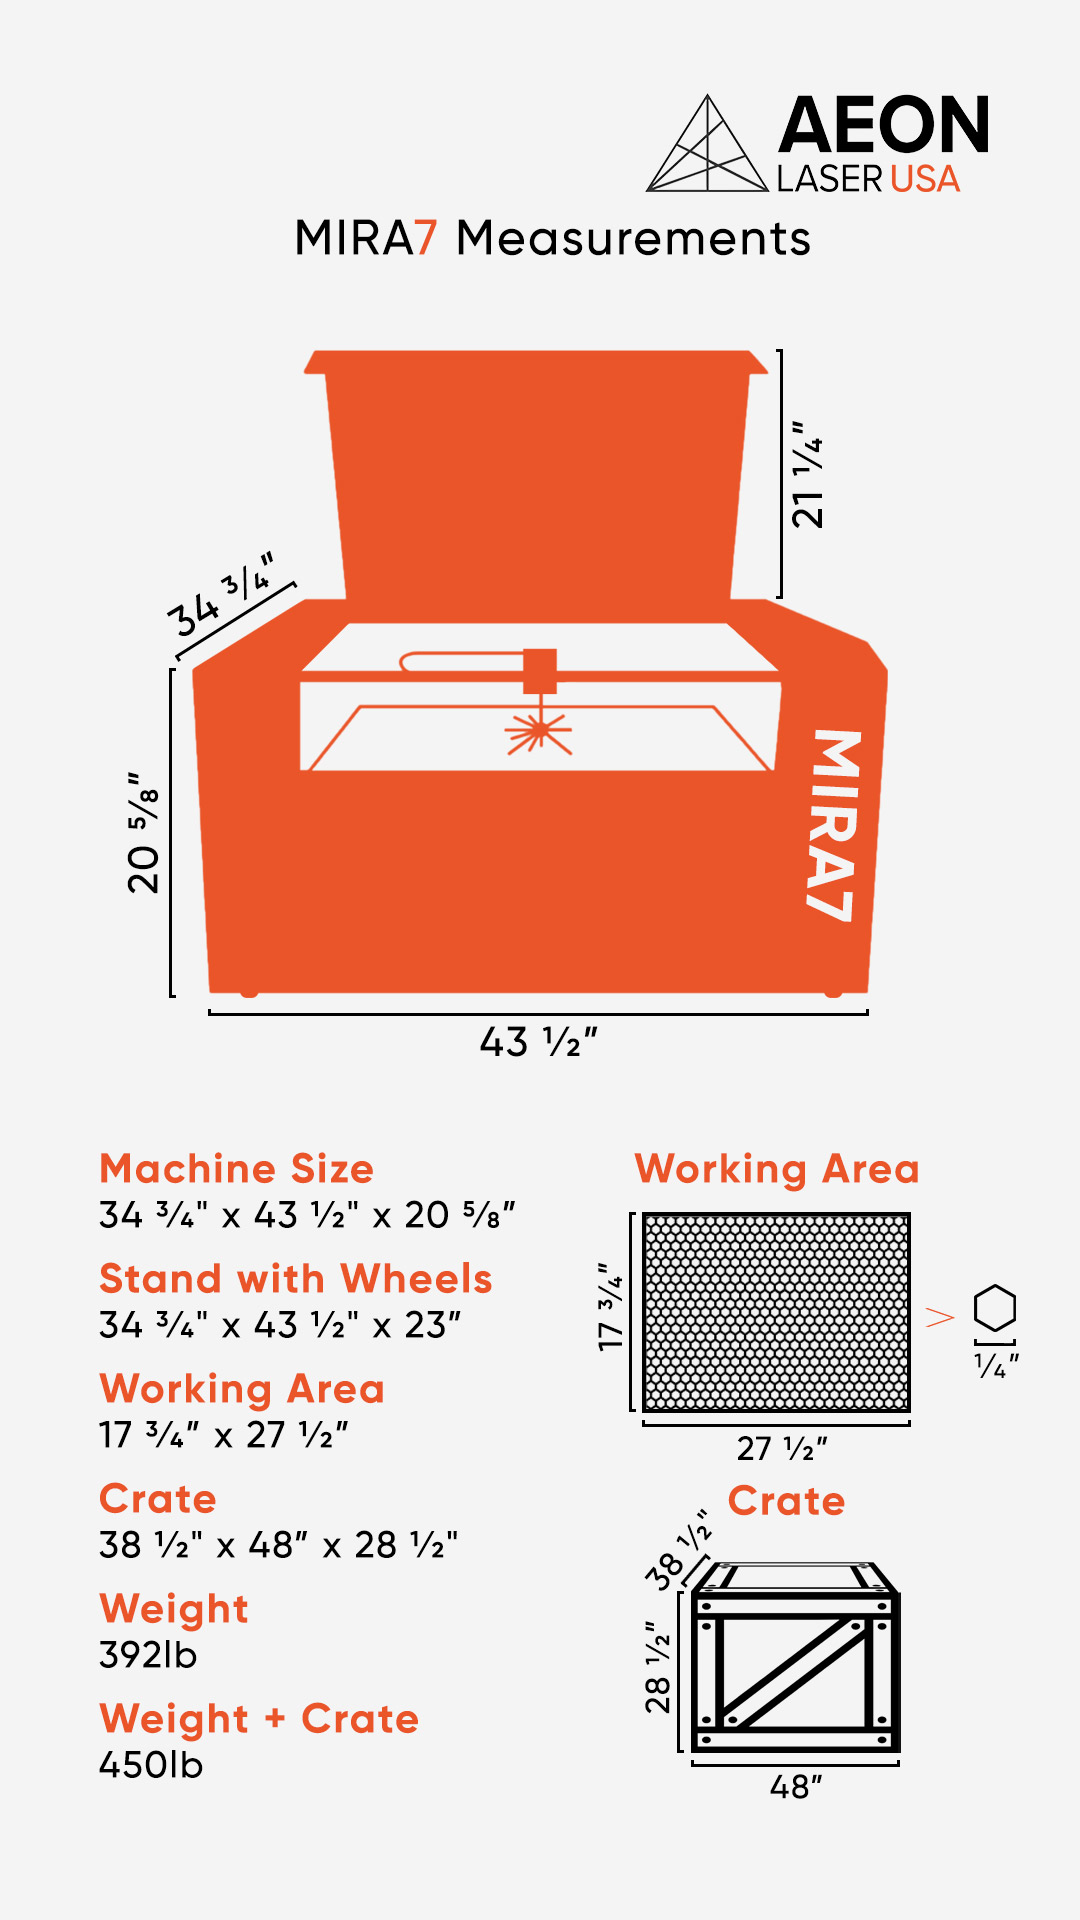 Graphic showing the dimensions of the Aeon MIRA 7 laser, crate size, and weight info